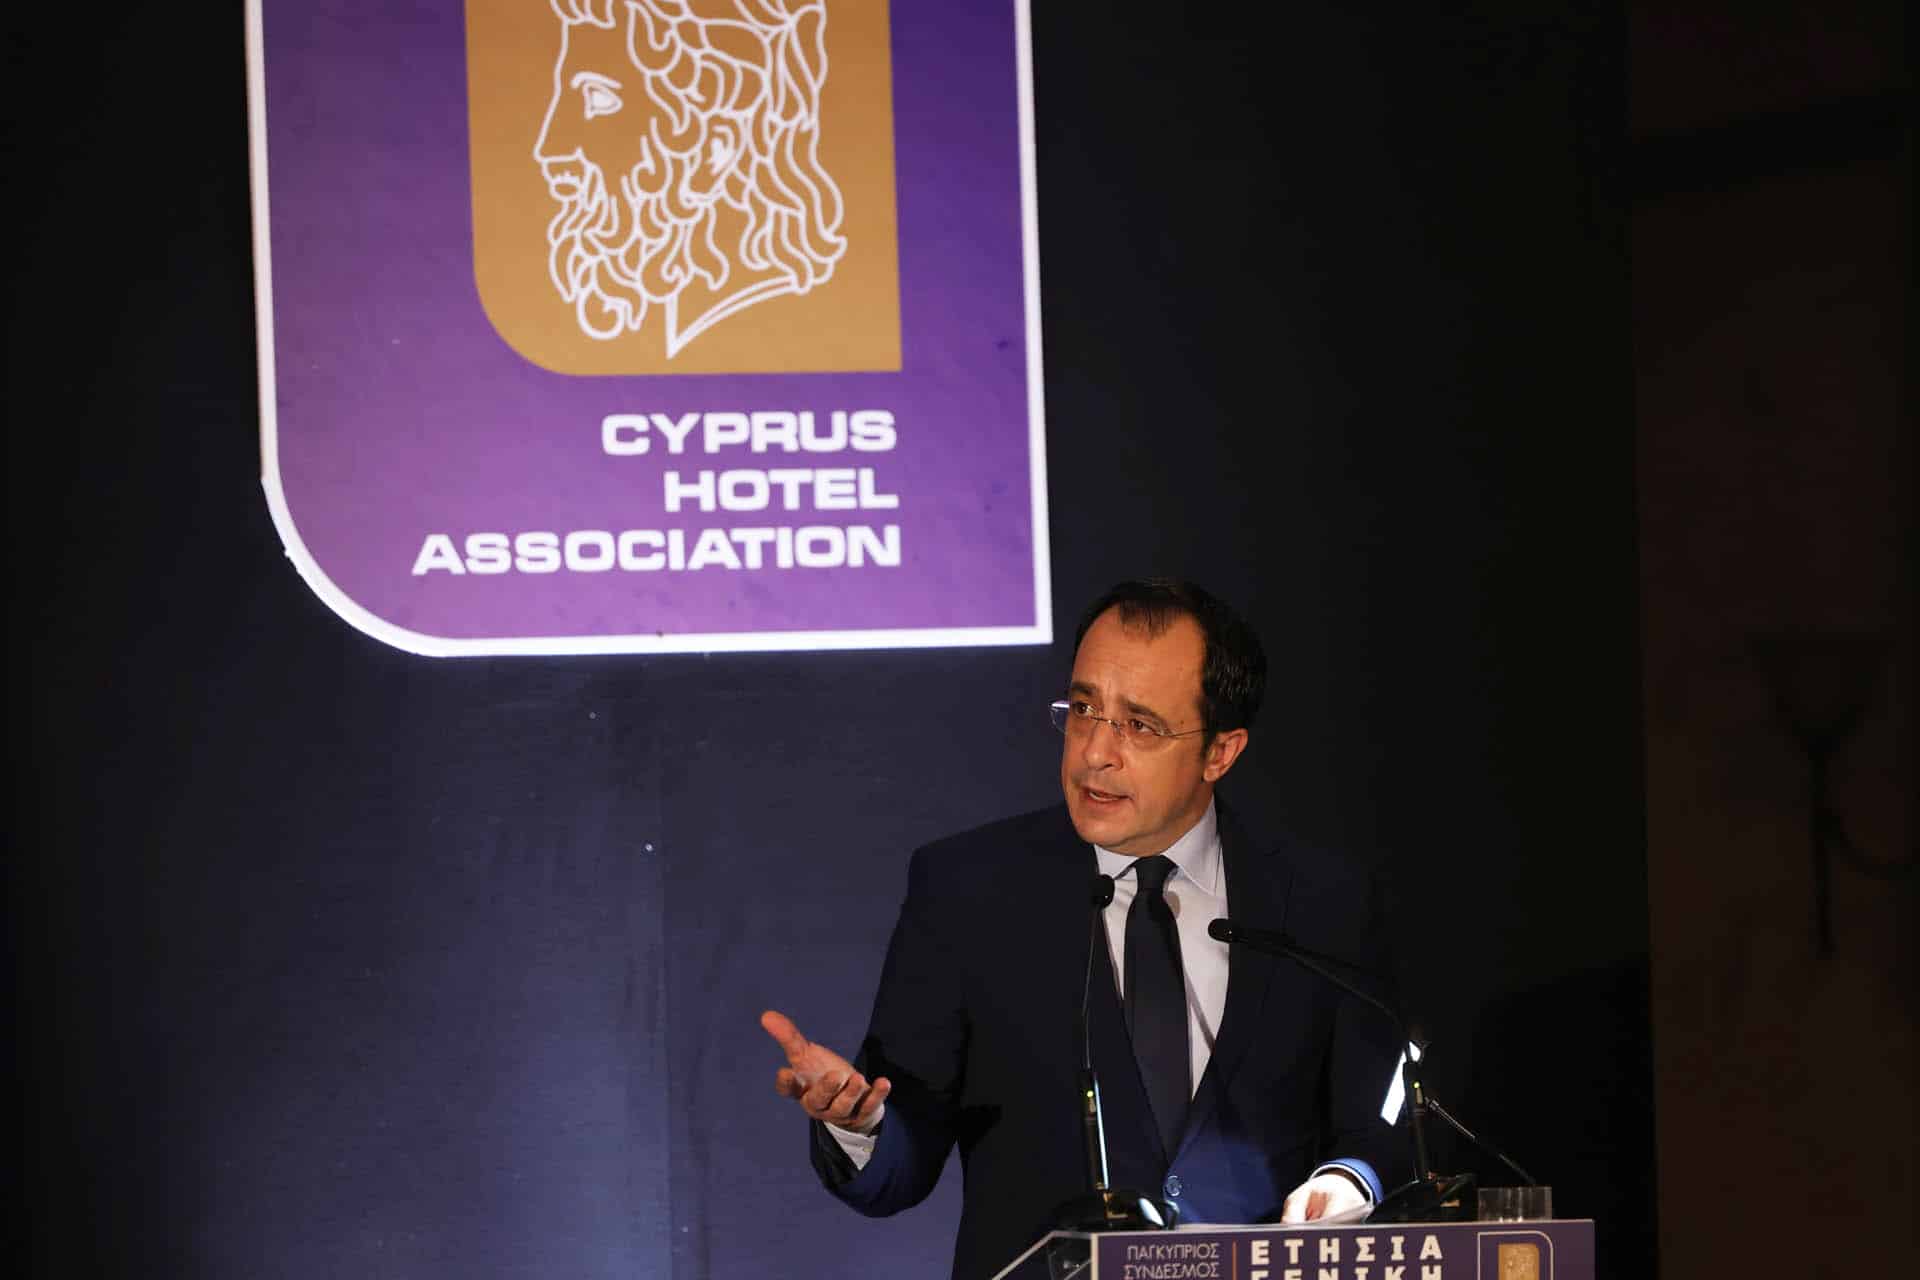 image Risk always part of the tourism industry says Cyprus president